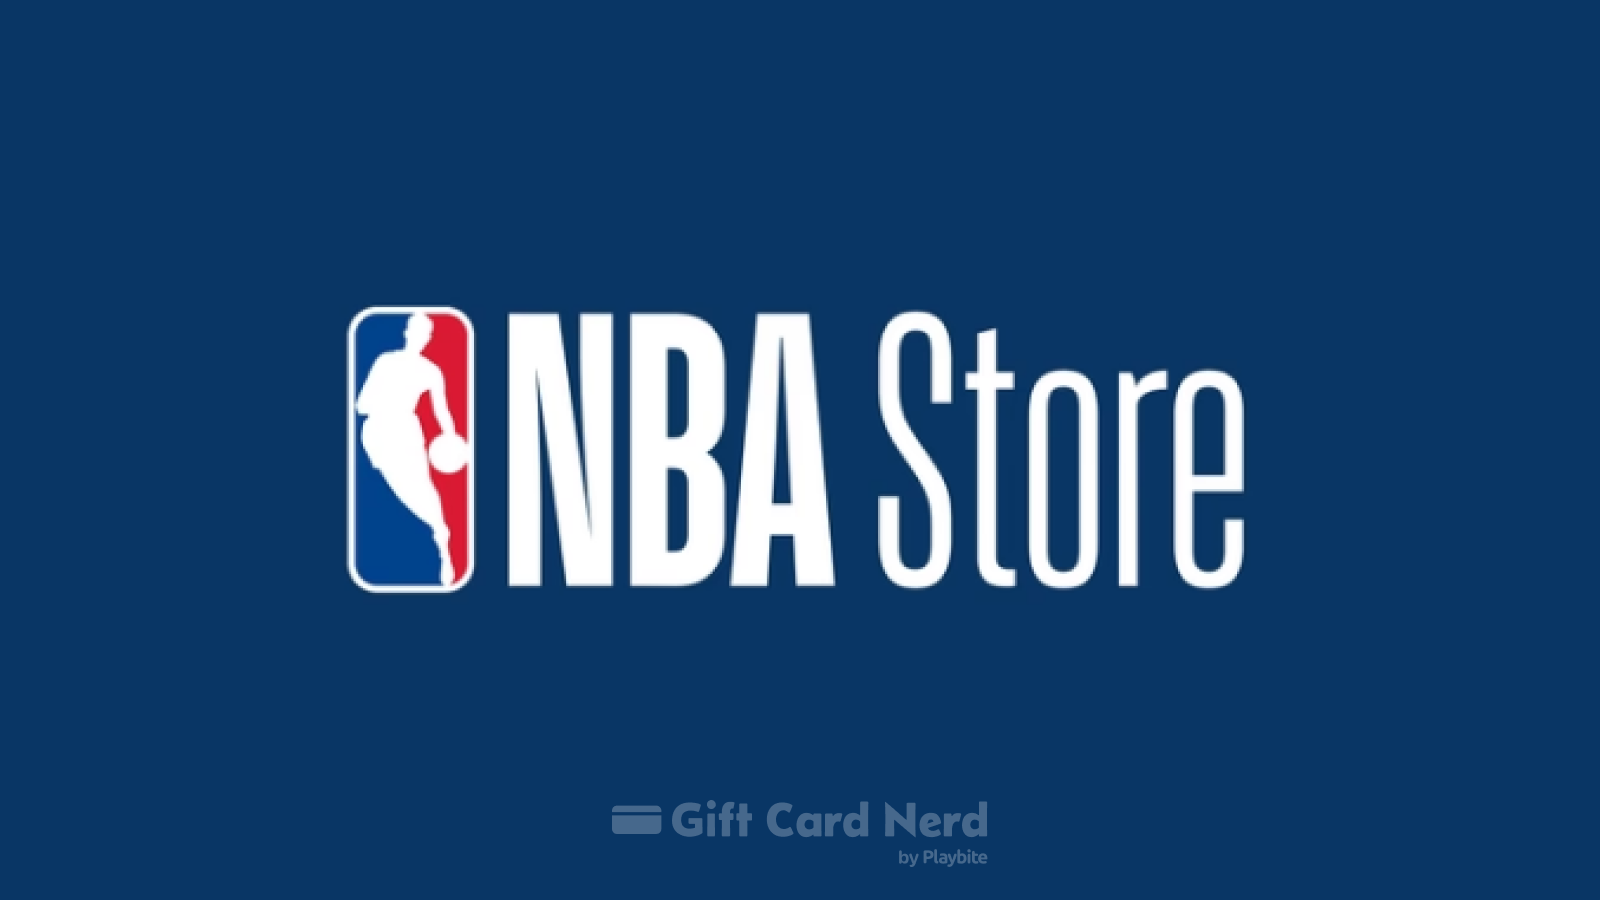 Can I Use an NBA Store Gift Card on Postmates?